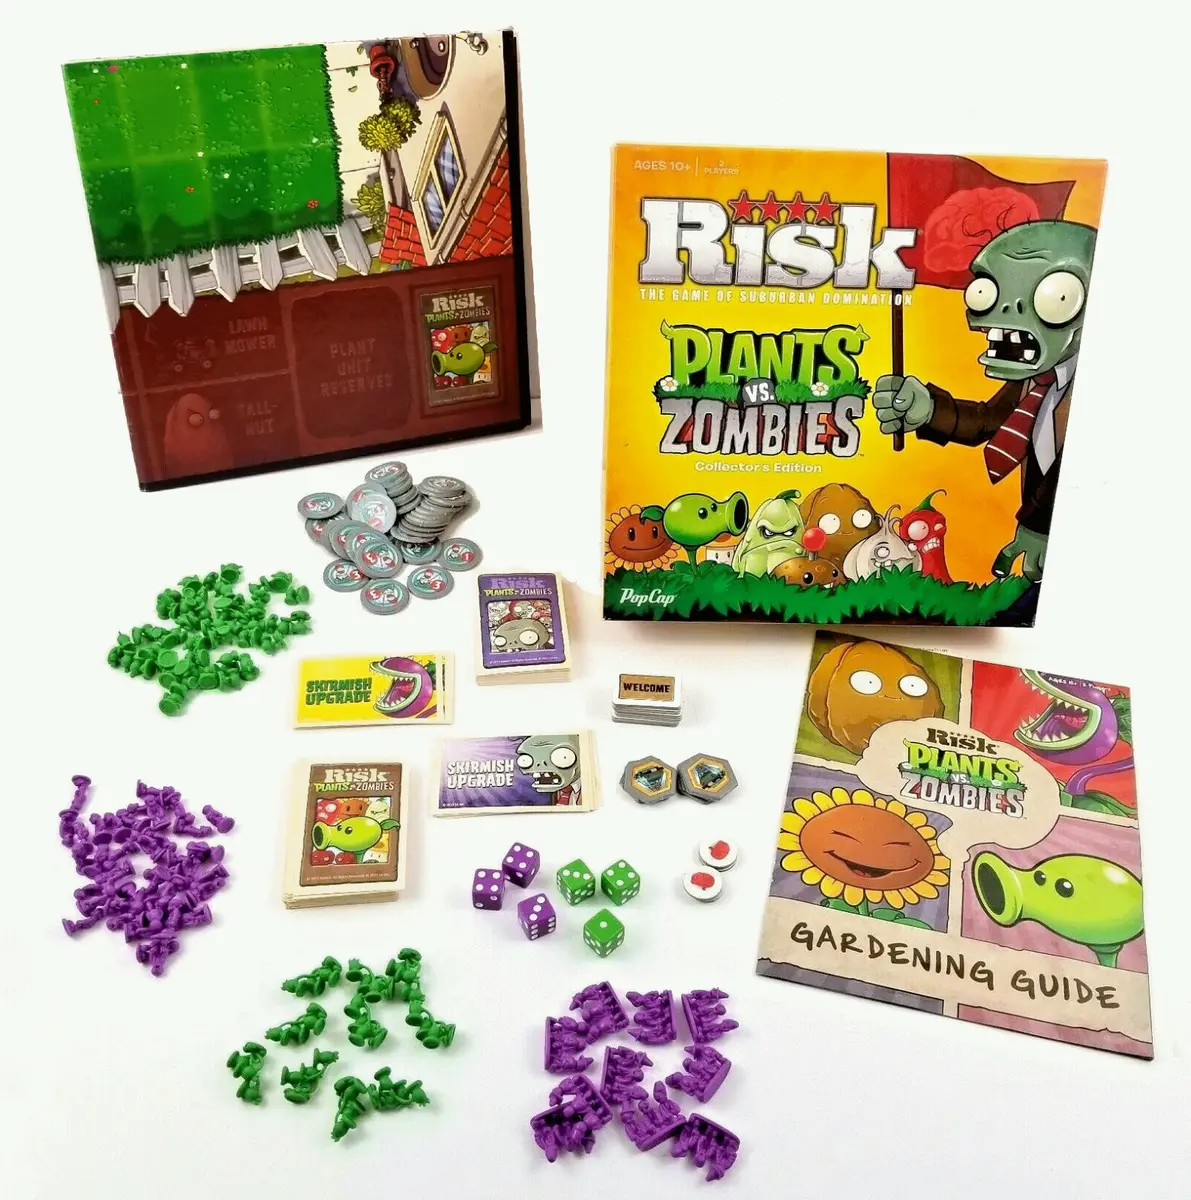 Risk plants vs zombies collectors edition game replacement parts pieces cards